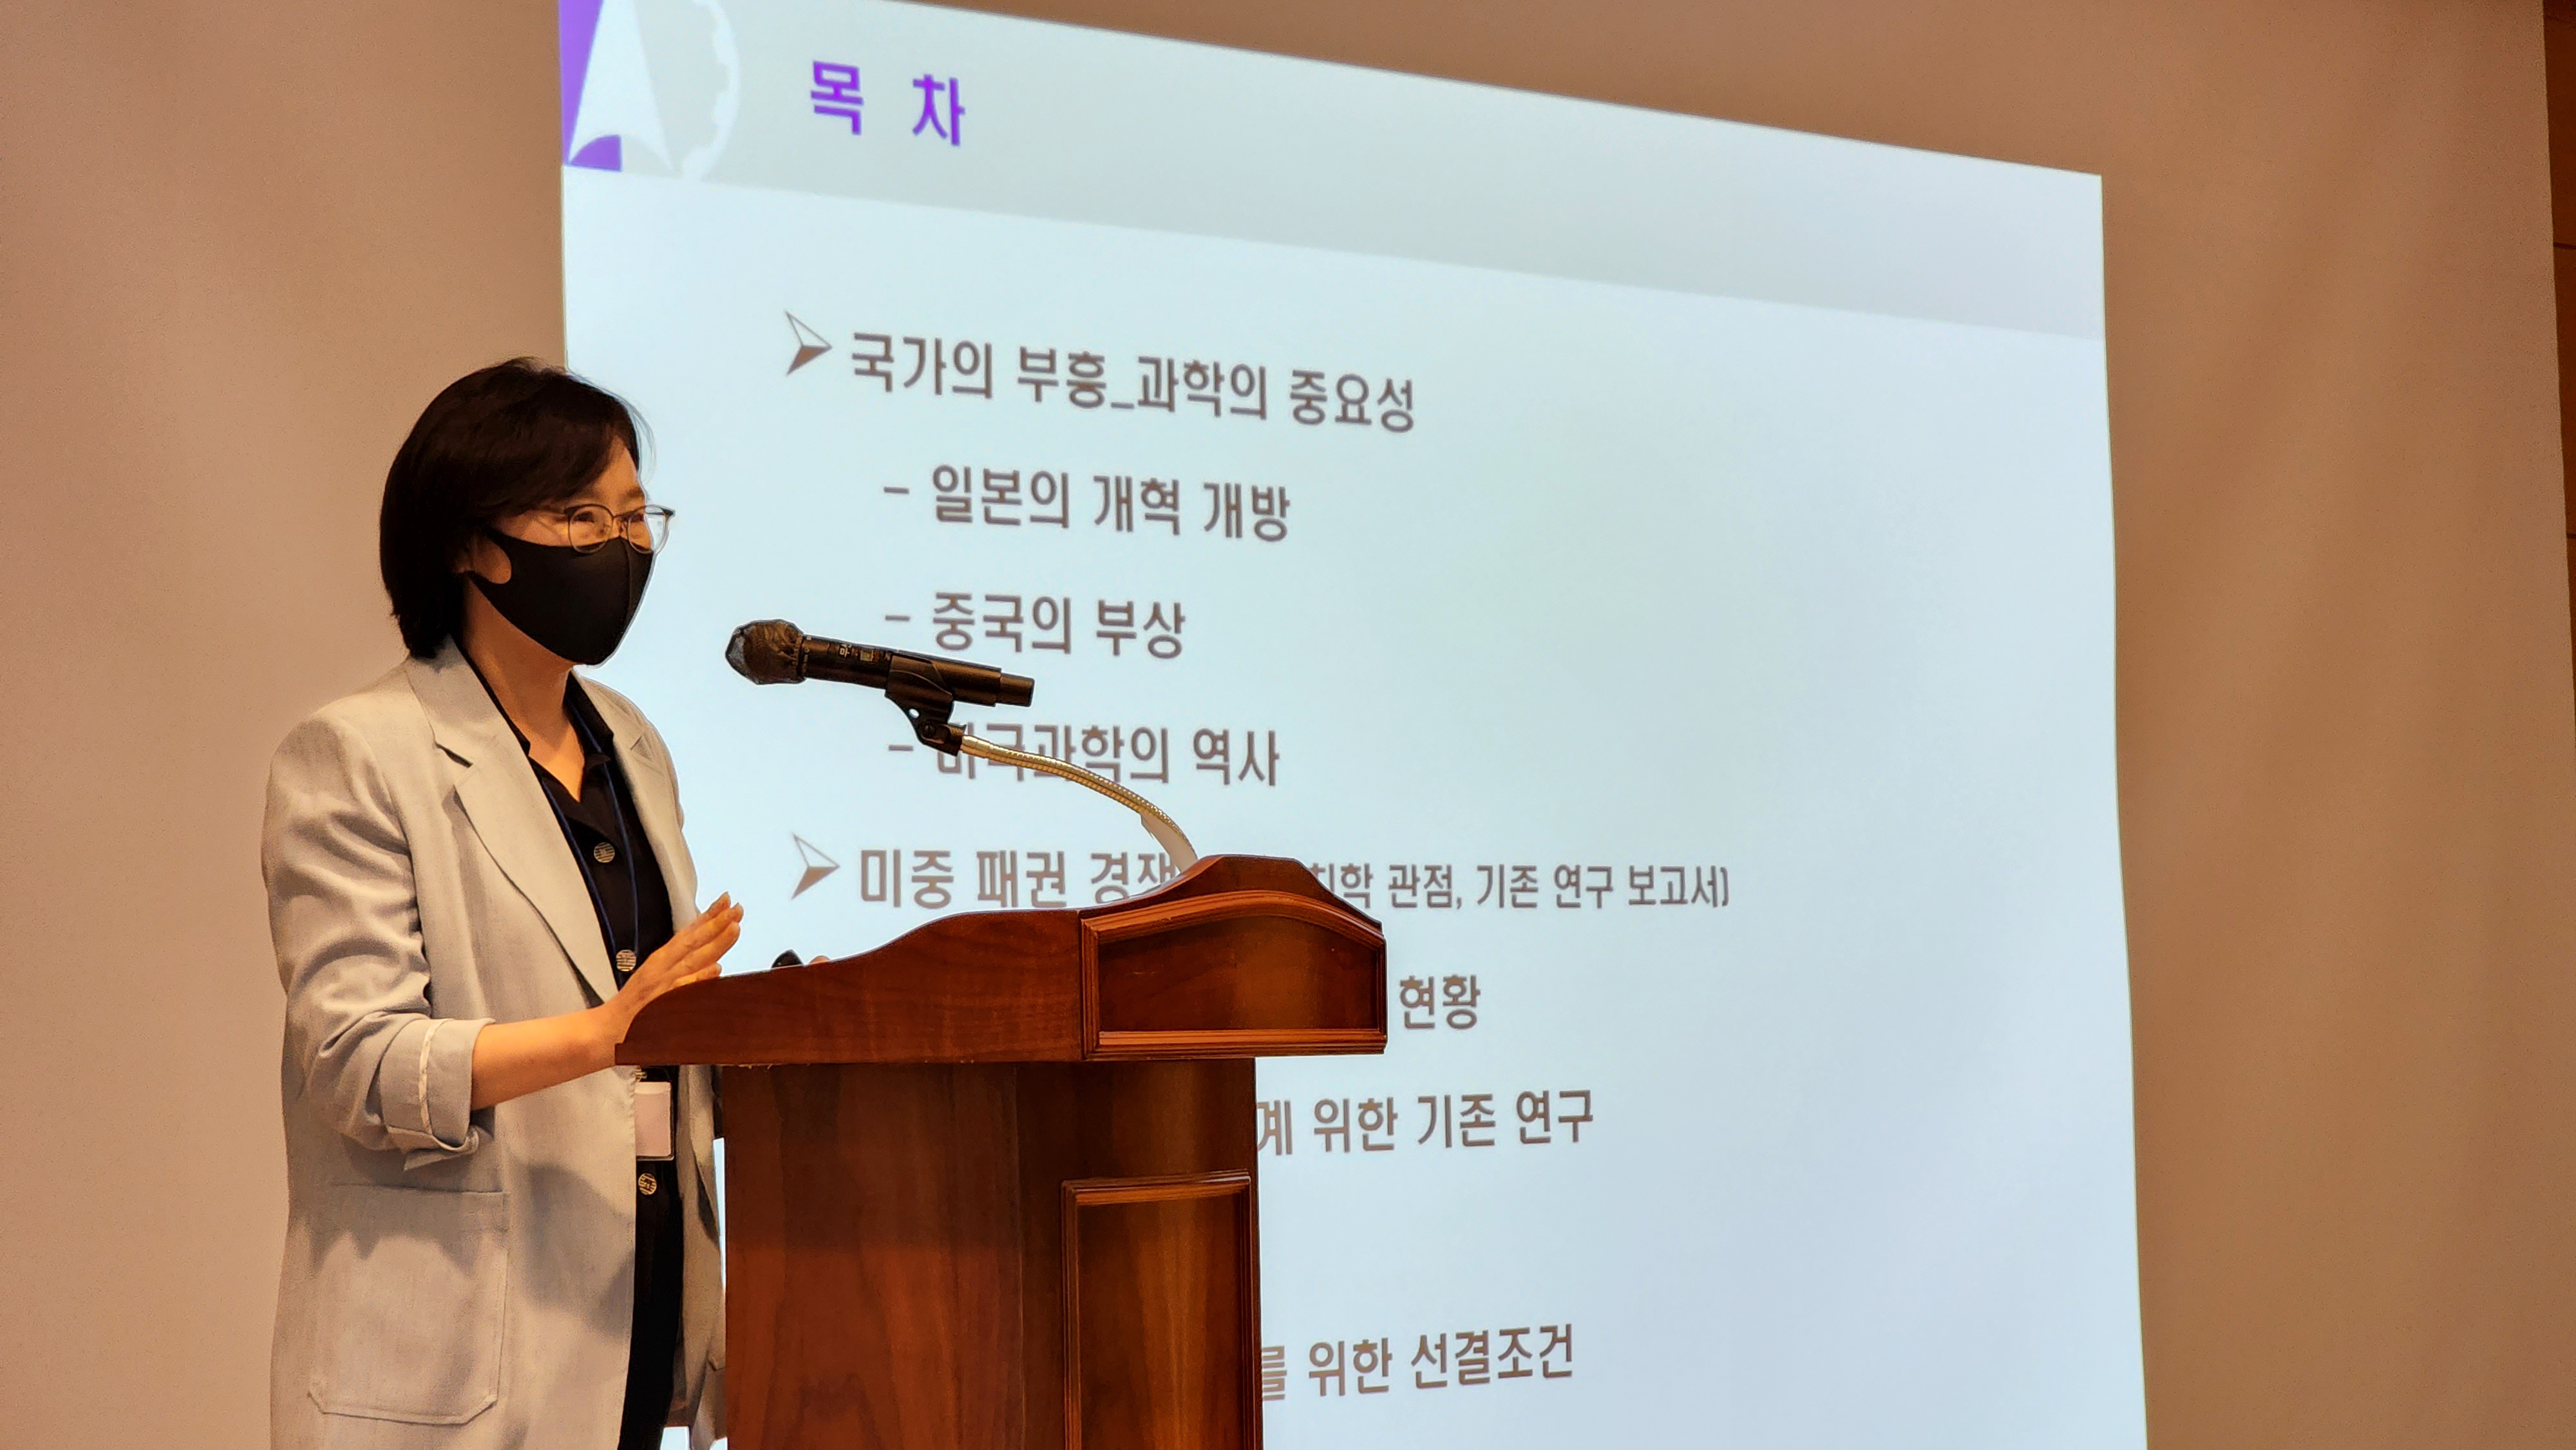 Korea Innovation Foundation, Daedeok INNOPOLIS opened a forum for discussion on the era of technological hegemony